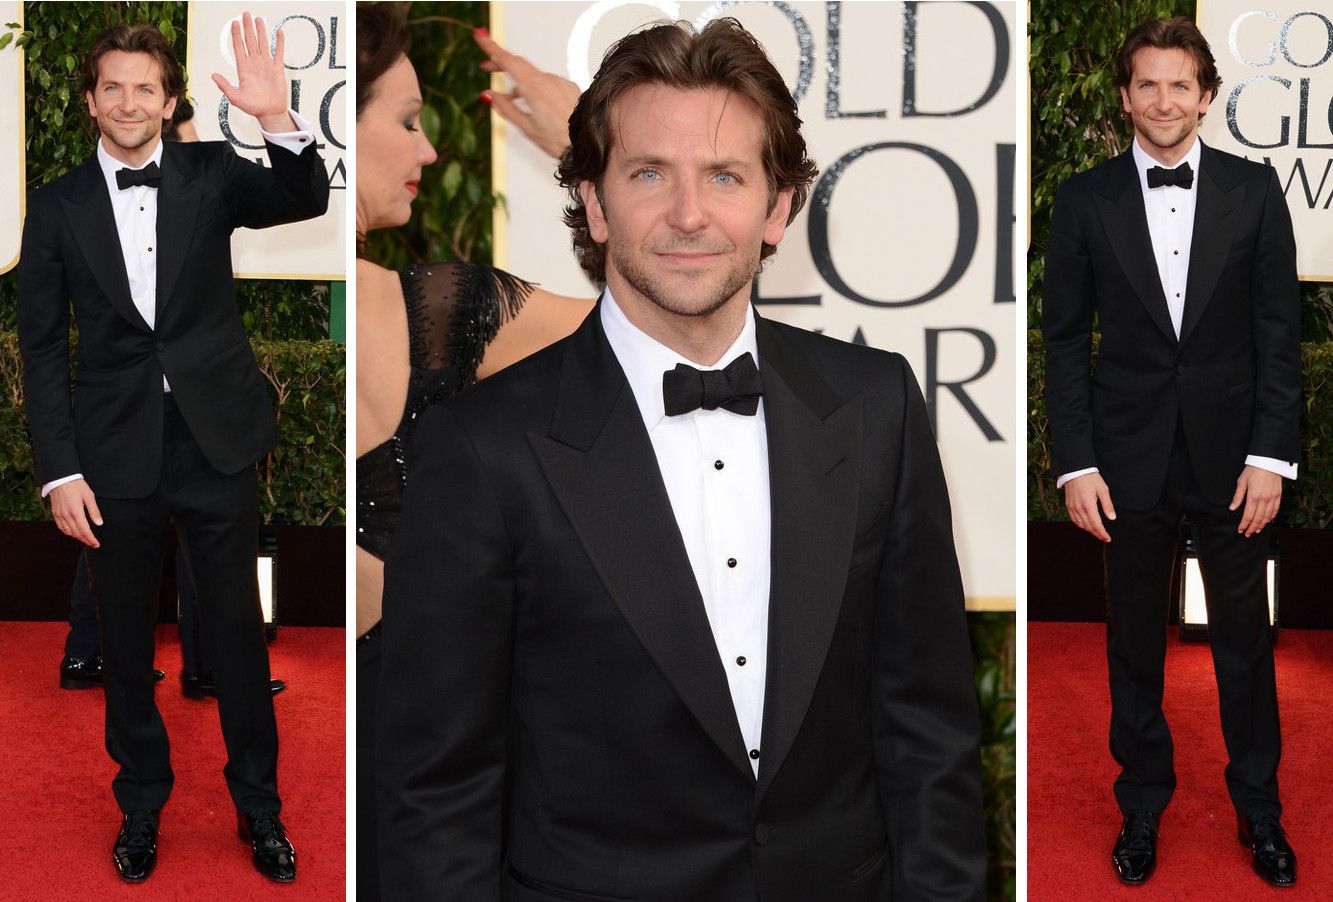 Bradley Cooper in Tom Ford at the 70th Annual Golden Globe Awards